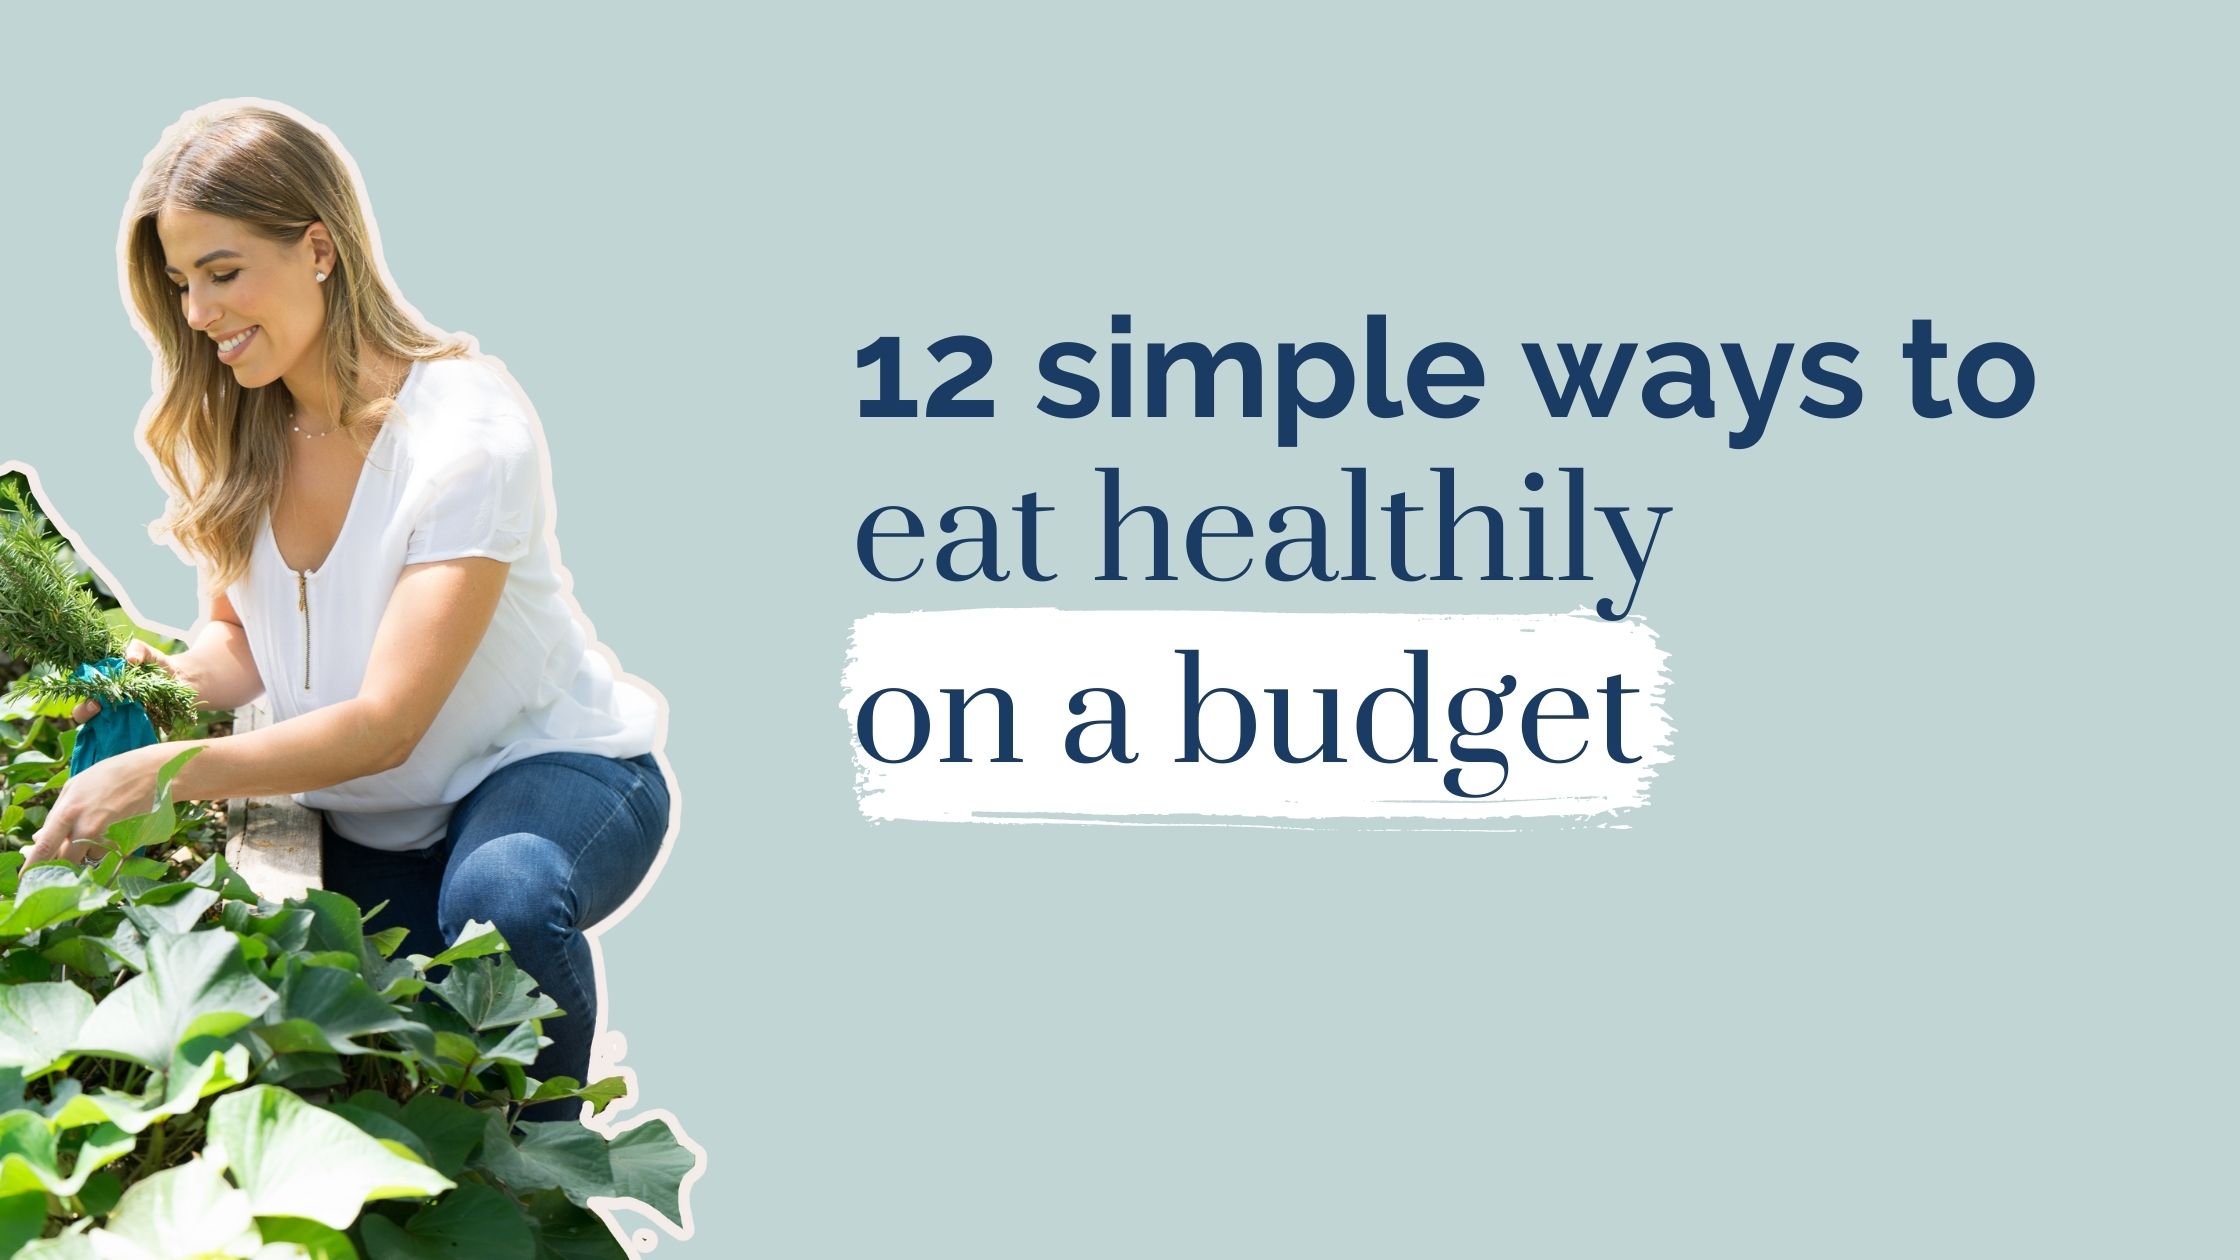 12 simple ways to eat healthily on a budget